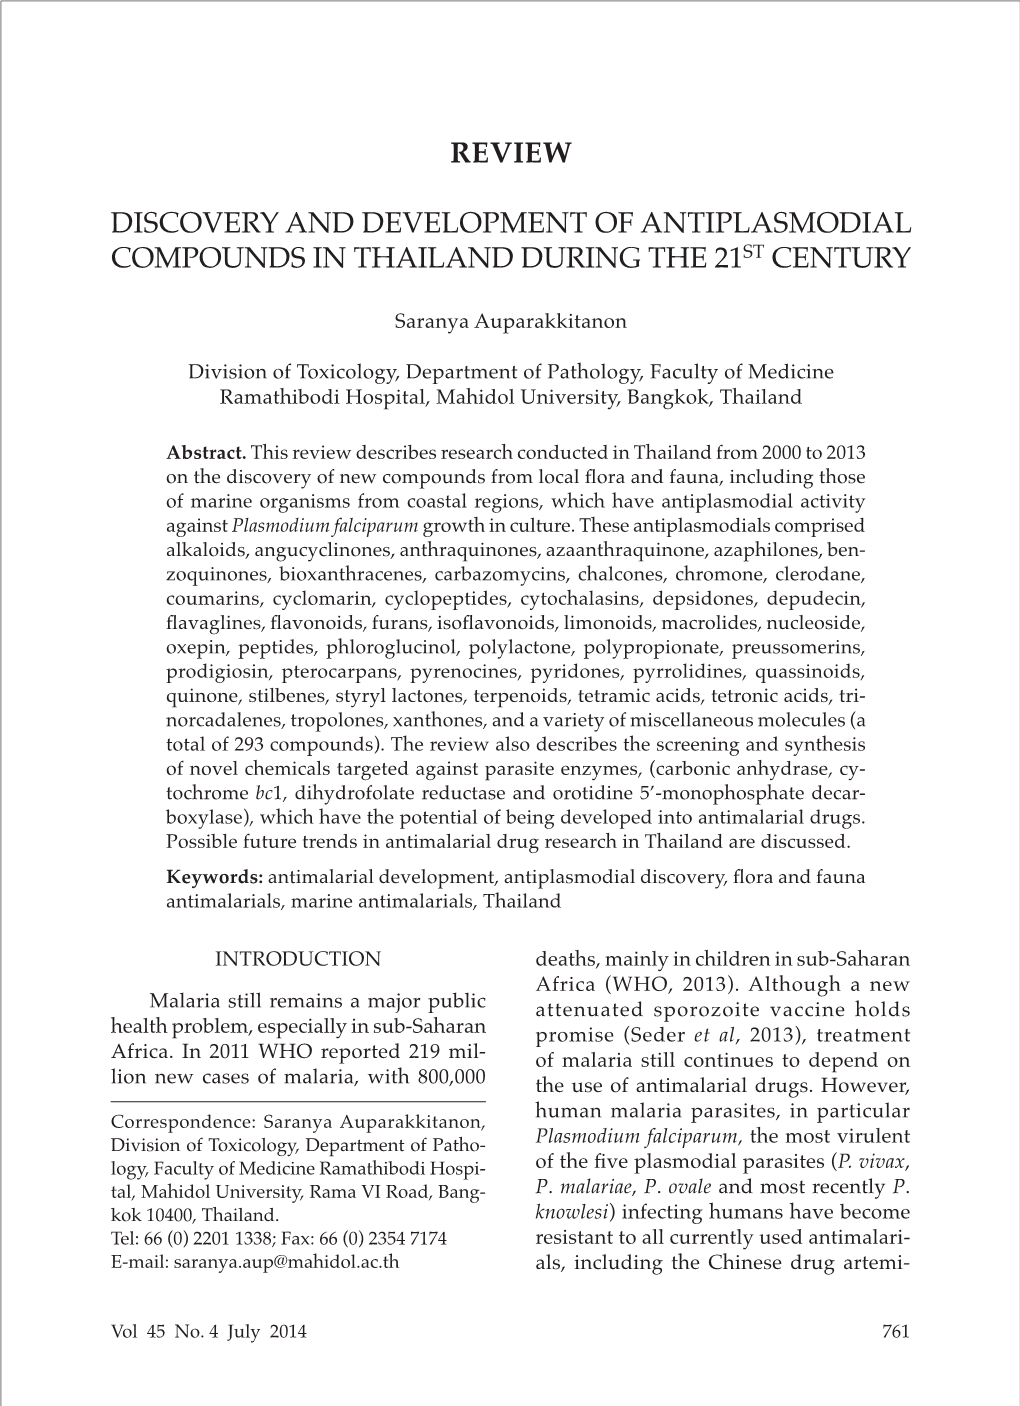 Review Discovery and Development of Antiplasmodial Compounds in Thailand During the 21St Century